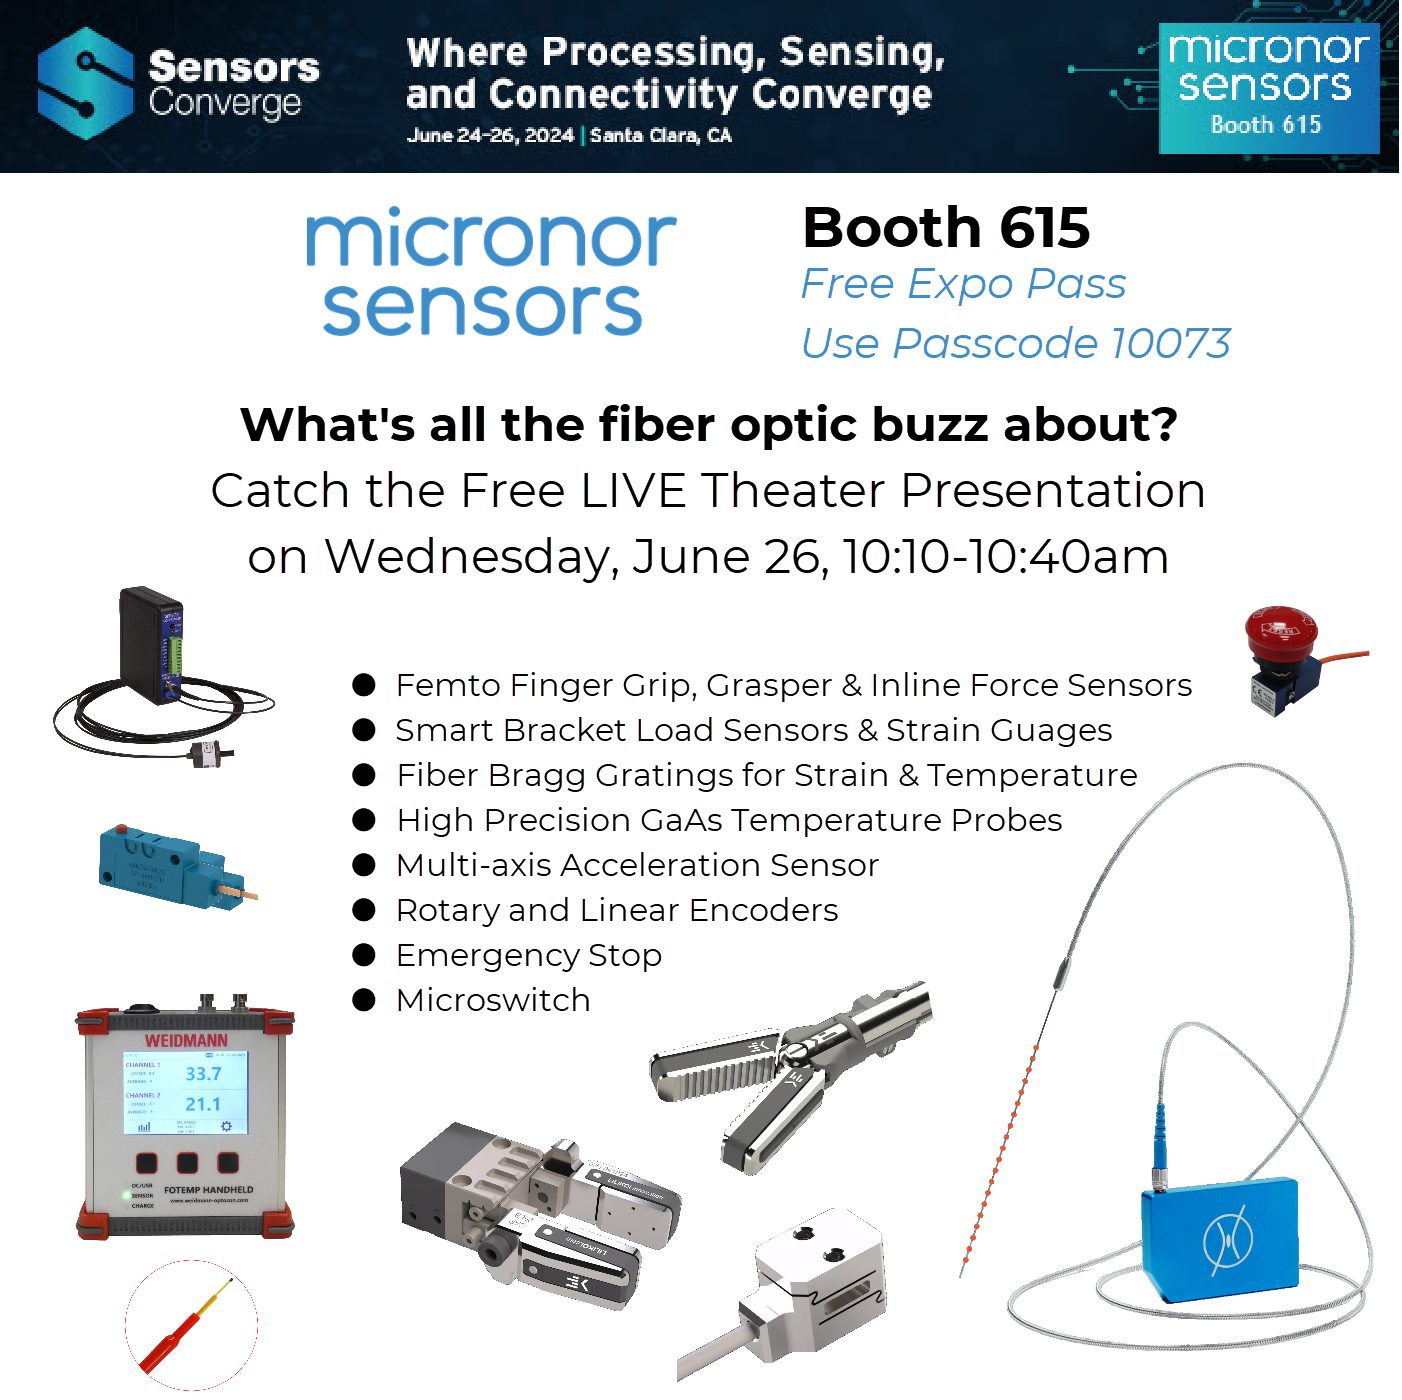 Catch the fiber optic buzz at upcoming Sensors Converge, June 25-26 at Santa Clara Convention Center, Free Expo Pass and Free Parking